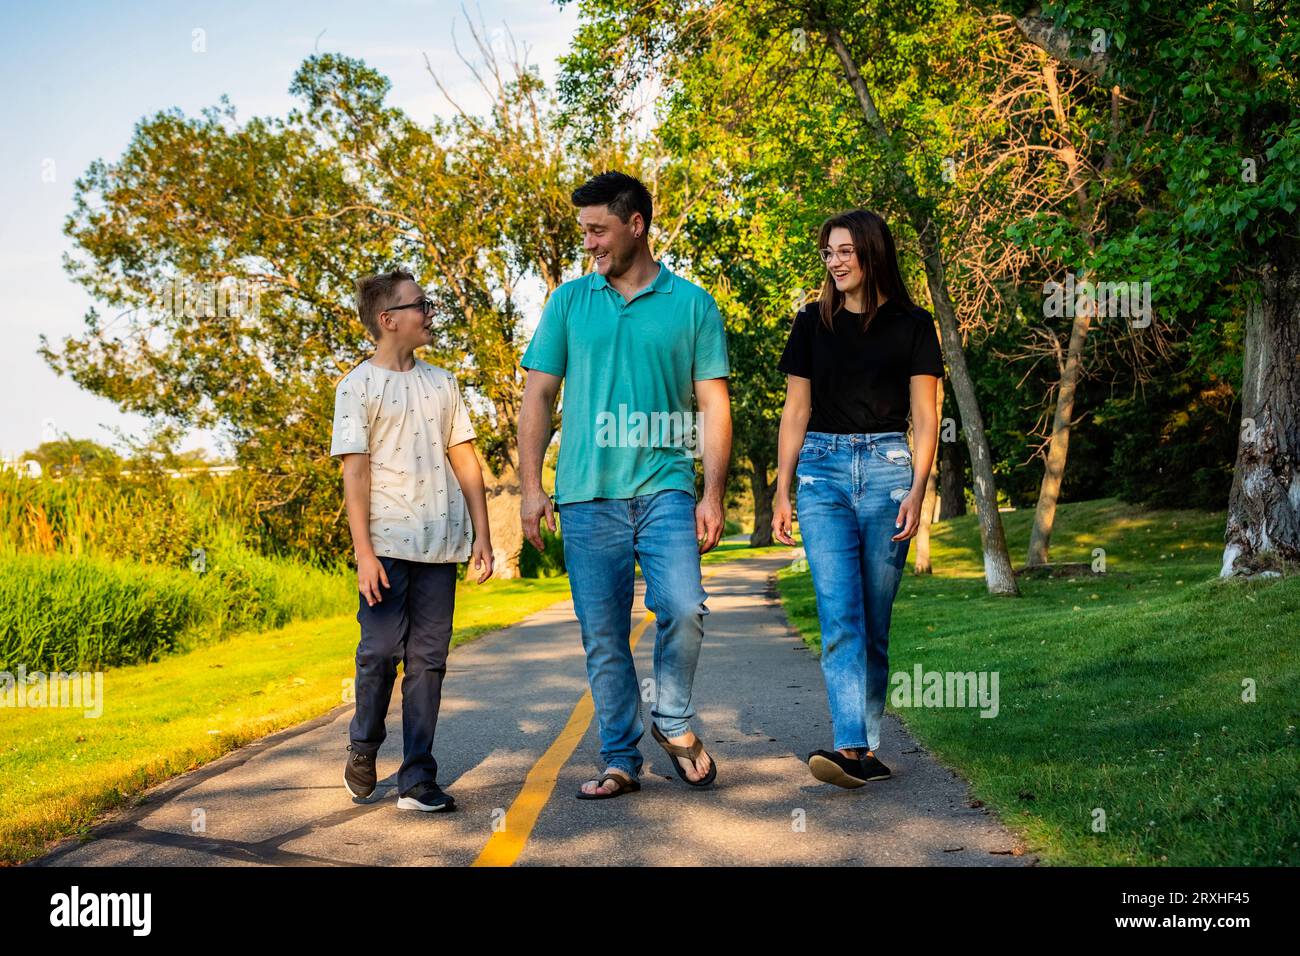 Father spending quality time outdoors with his teenage children, walking and talking in a city park during a warm fall afternoon Stock Photo